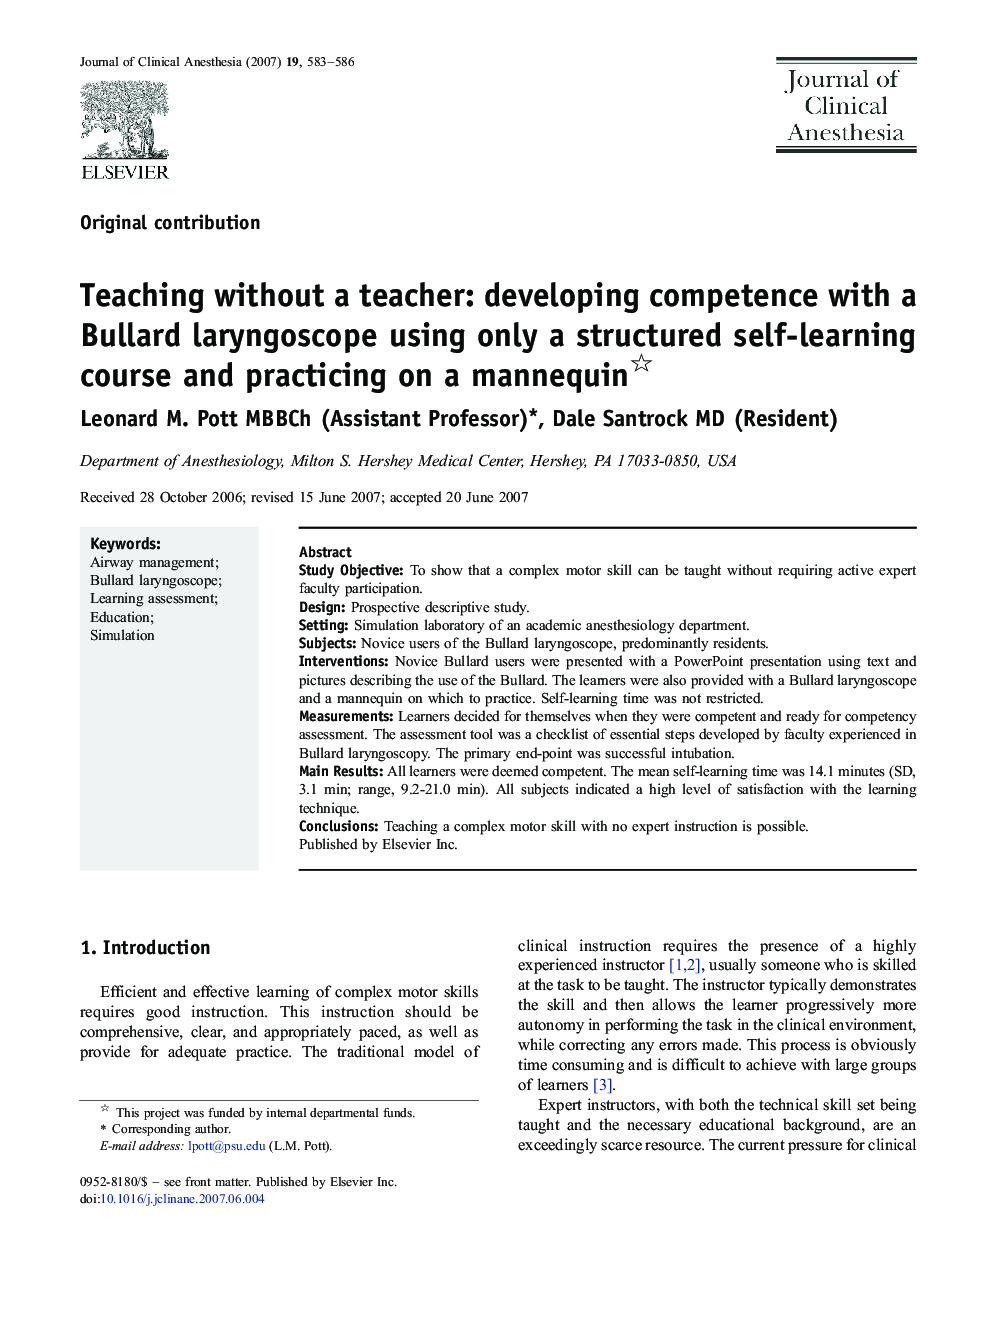 Teaching without a teacher: developing competence with a Bullard laryngoscope using only a structured self-learning course and practicing on a mannequin 